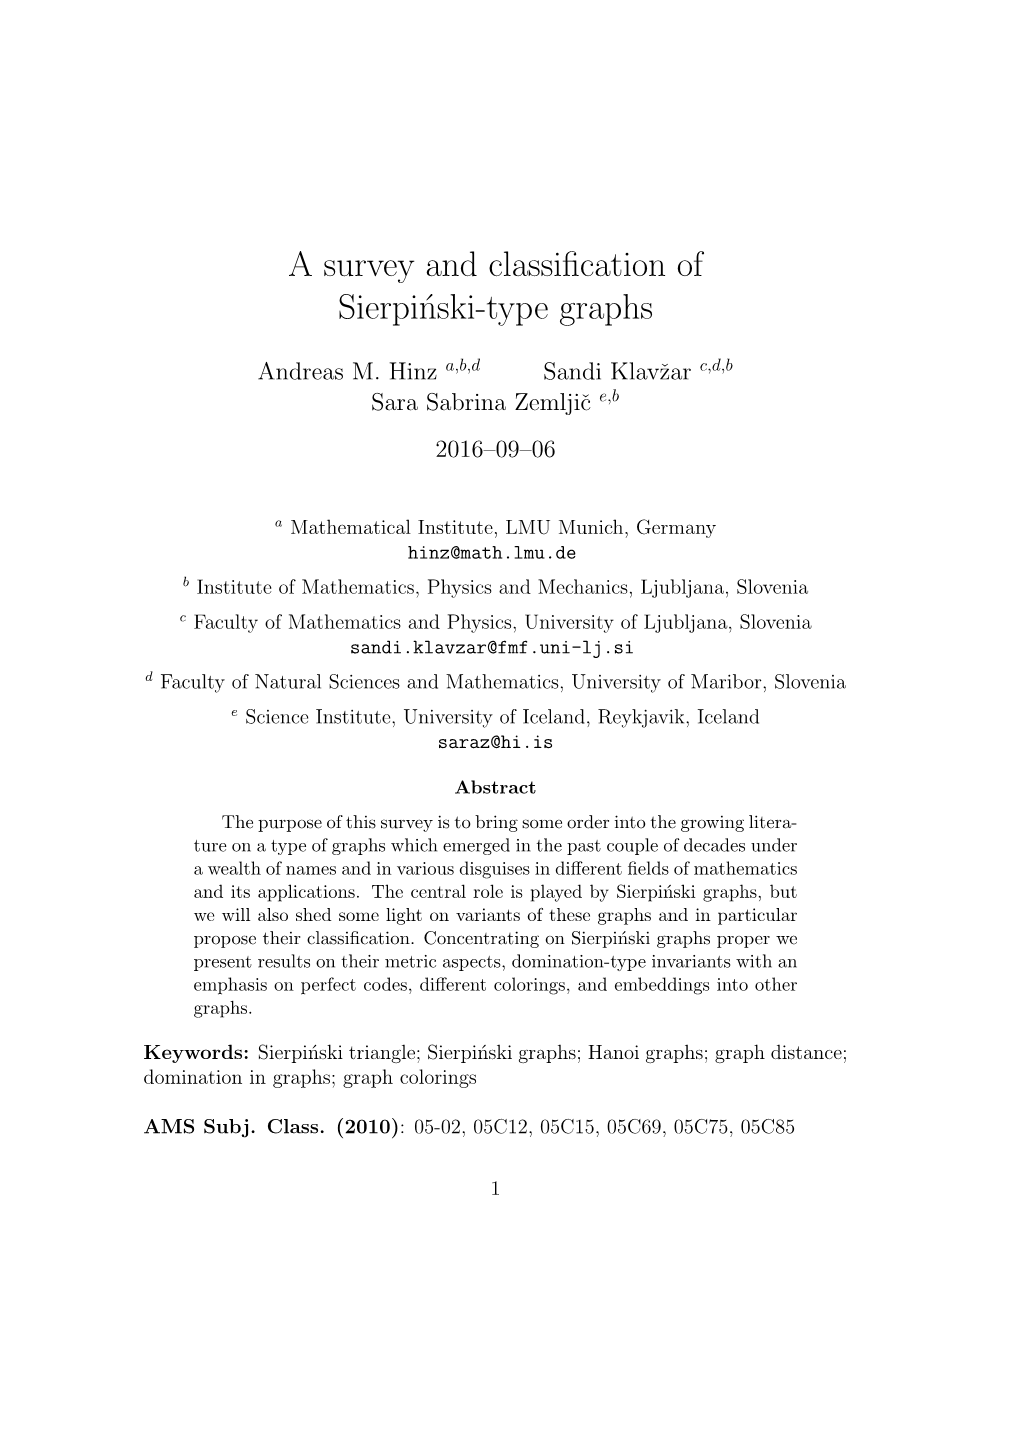 A Survey and Classification of Sierpinski-Type Graphs